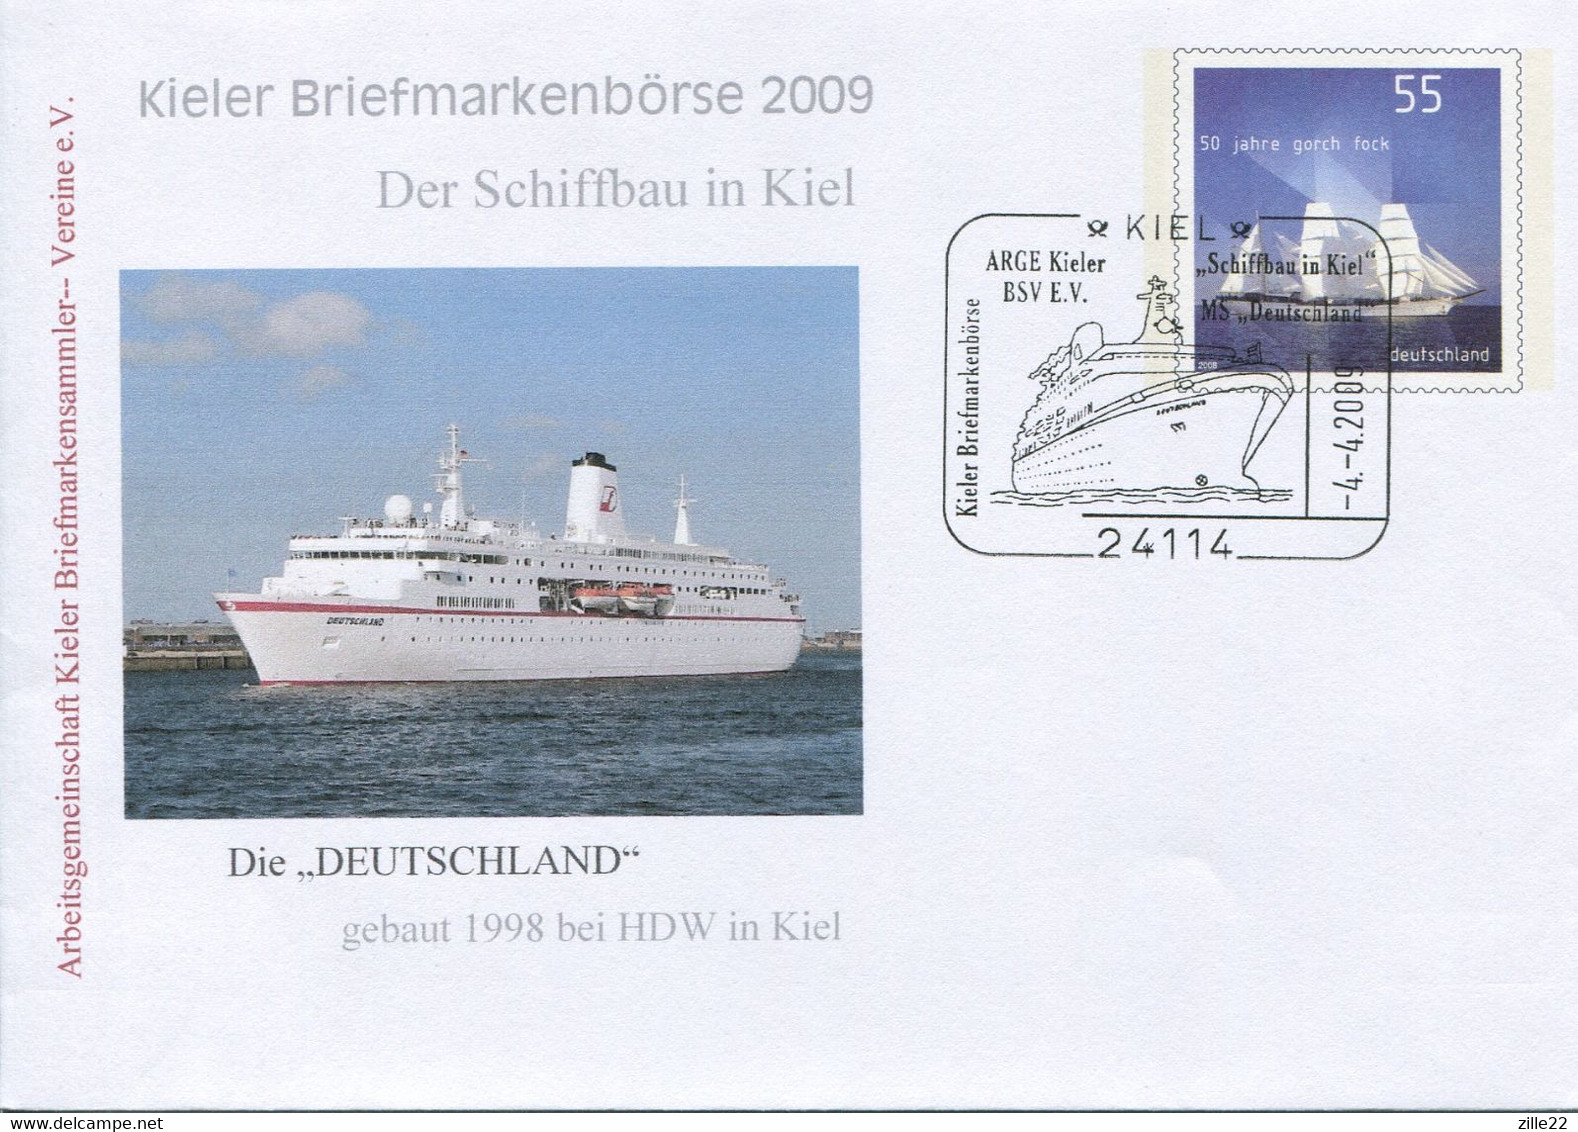 Germany Deutschland Postal Stationery - Cover - Gorch Fock Design - MS Deutschland - Private Covers - Used